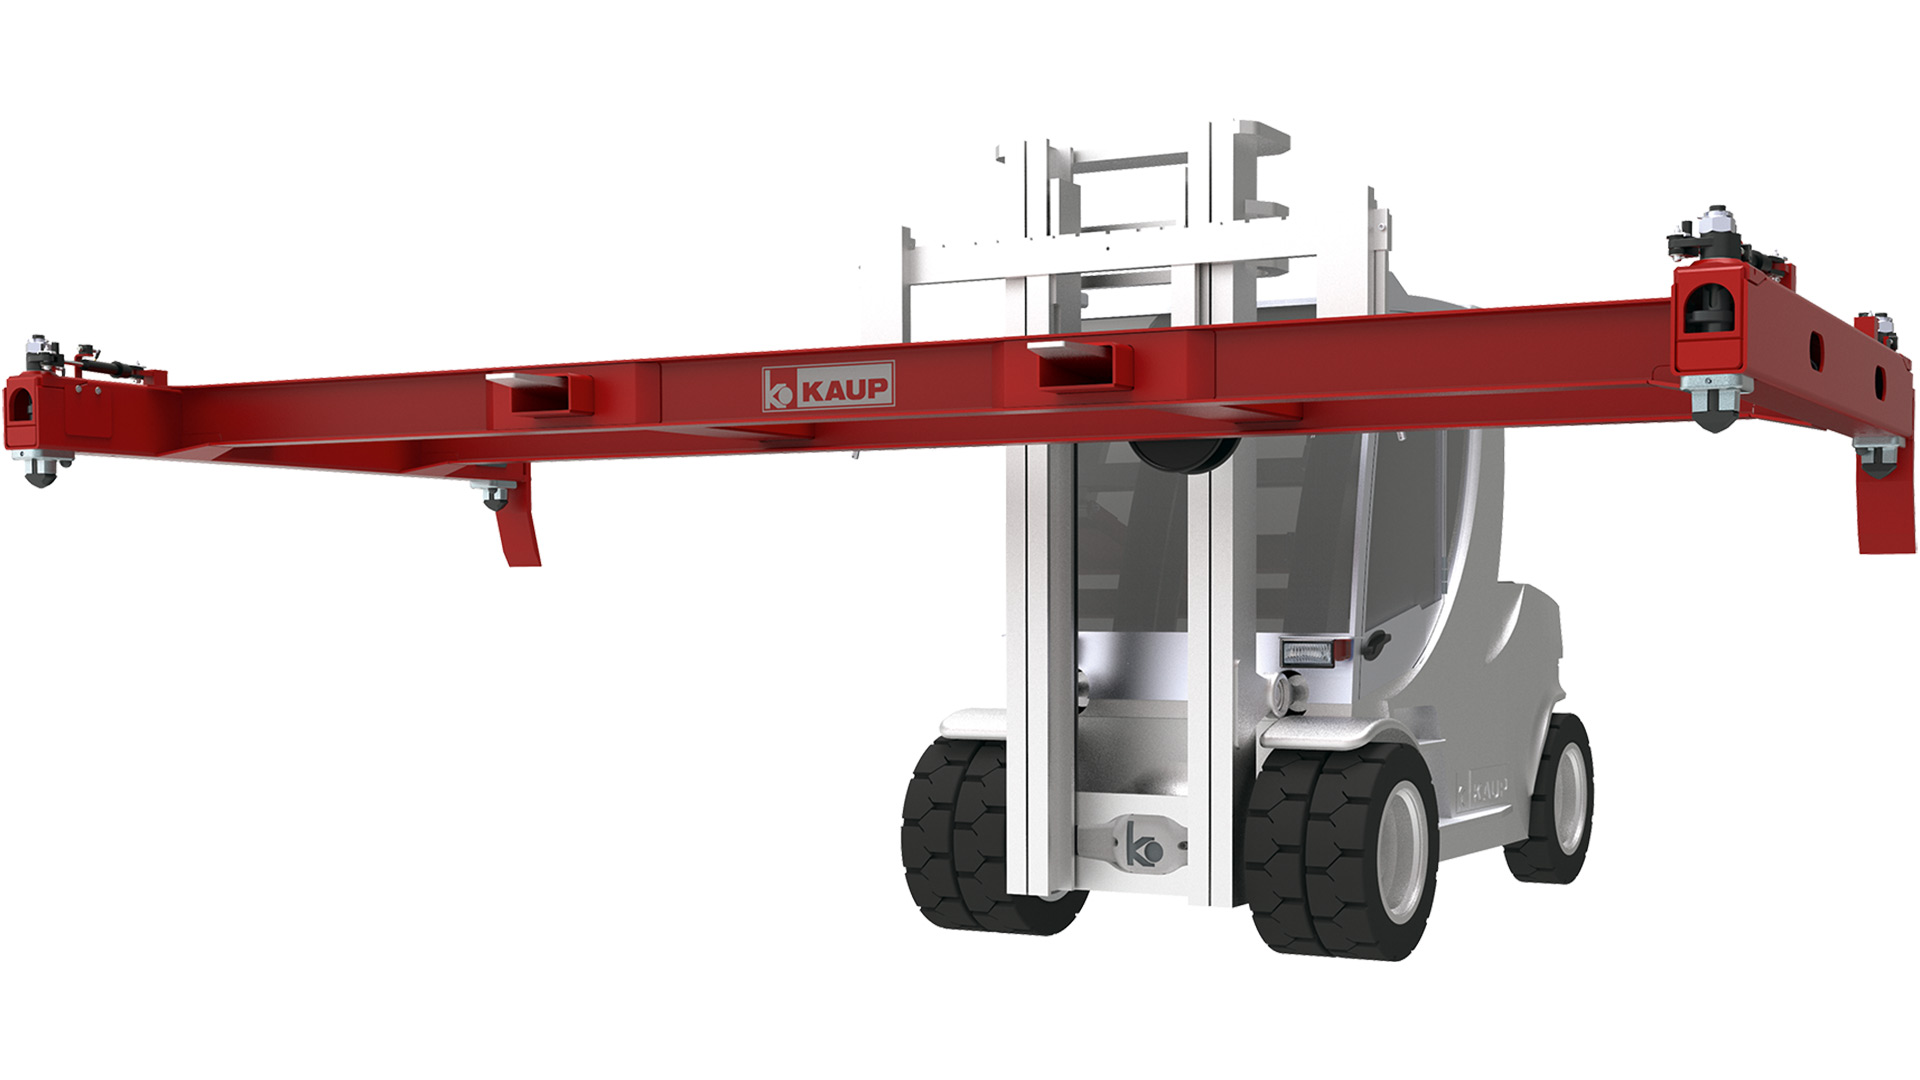 Graphic representation of a wide, red forklift attachment with the KAUP logo in the centre